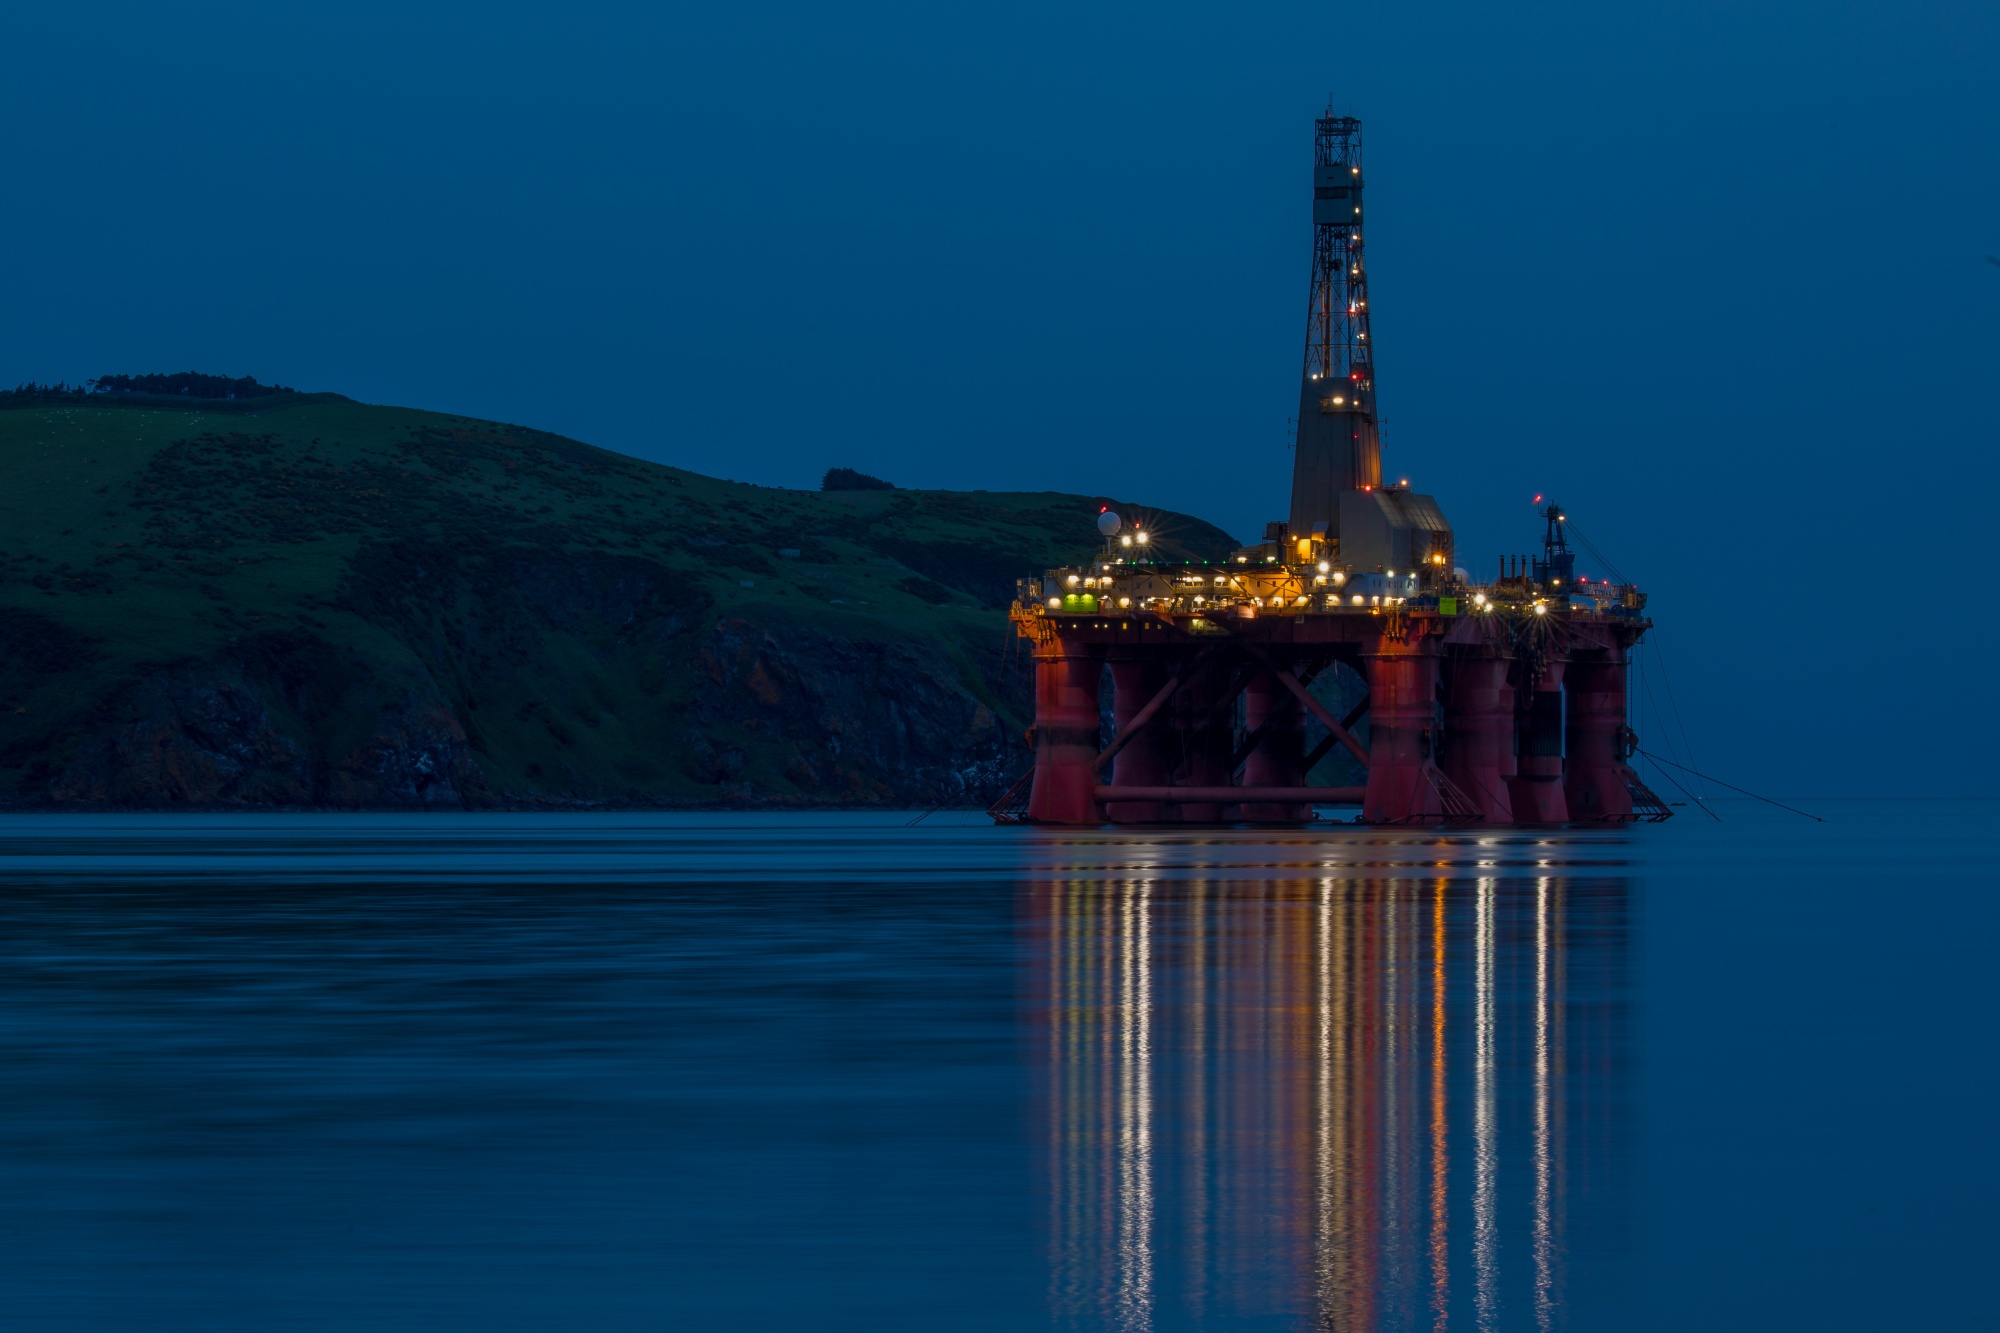 The Paul B. Loyd Jr drilling rig, operated by Transocean Inc., stands illuminated at night in the Port of Cromarty Firth in Cromarty, U.K., on Tuesday, June 23, 2020.